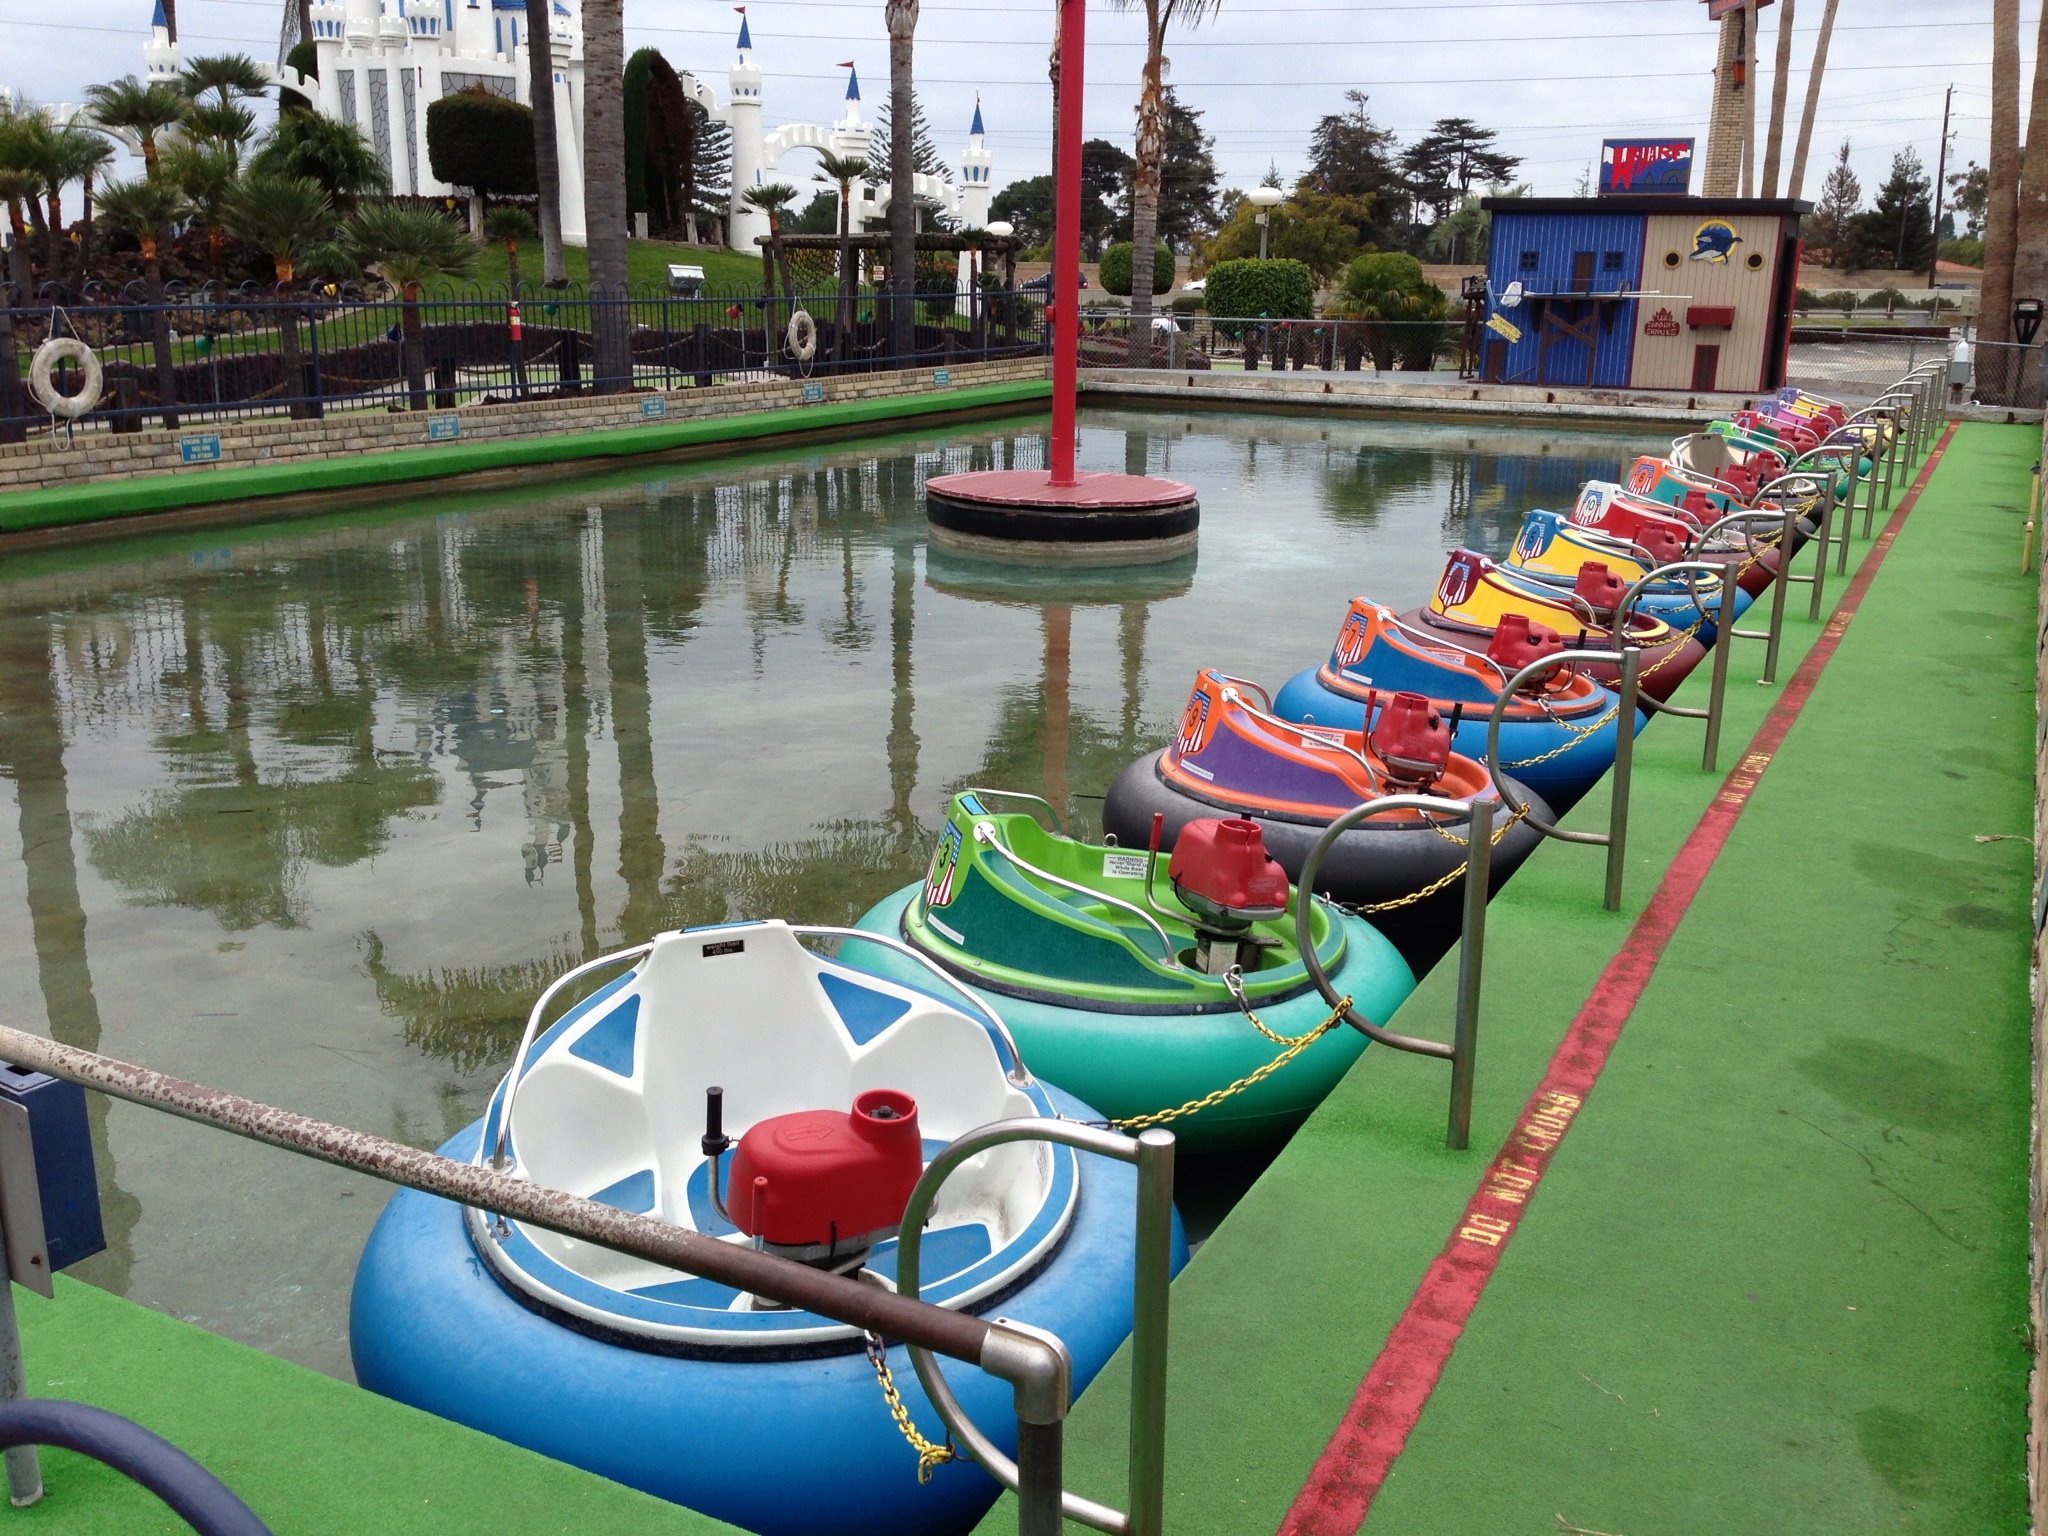  It was too cold for the bumper boats...darn, guess we will have to come back in the summer! 